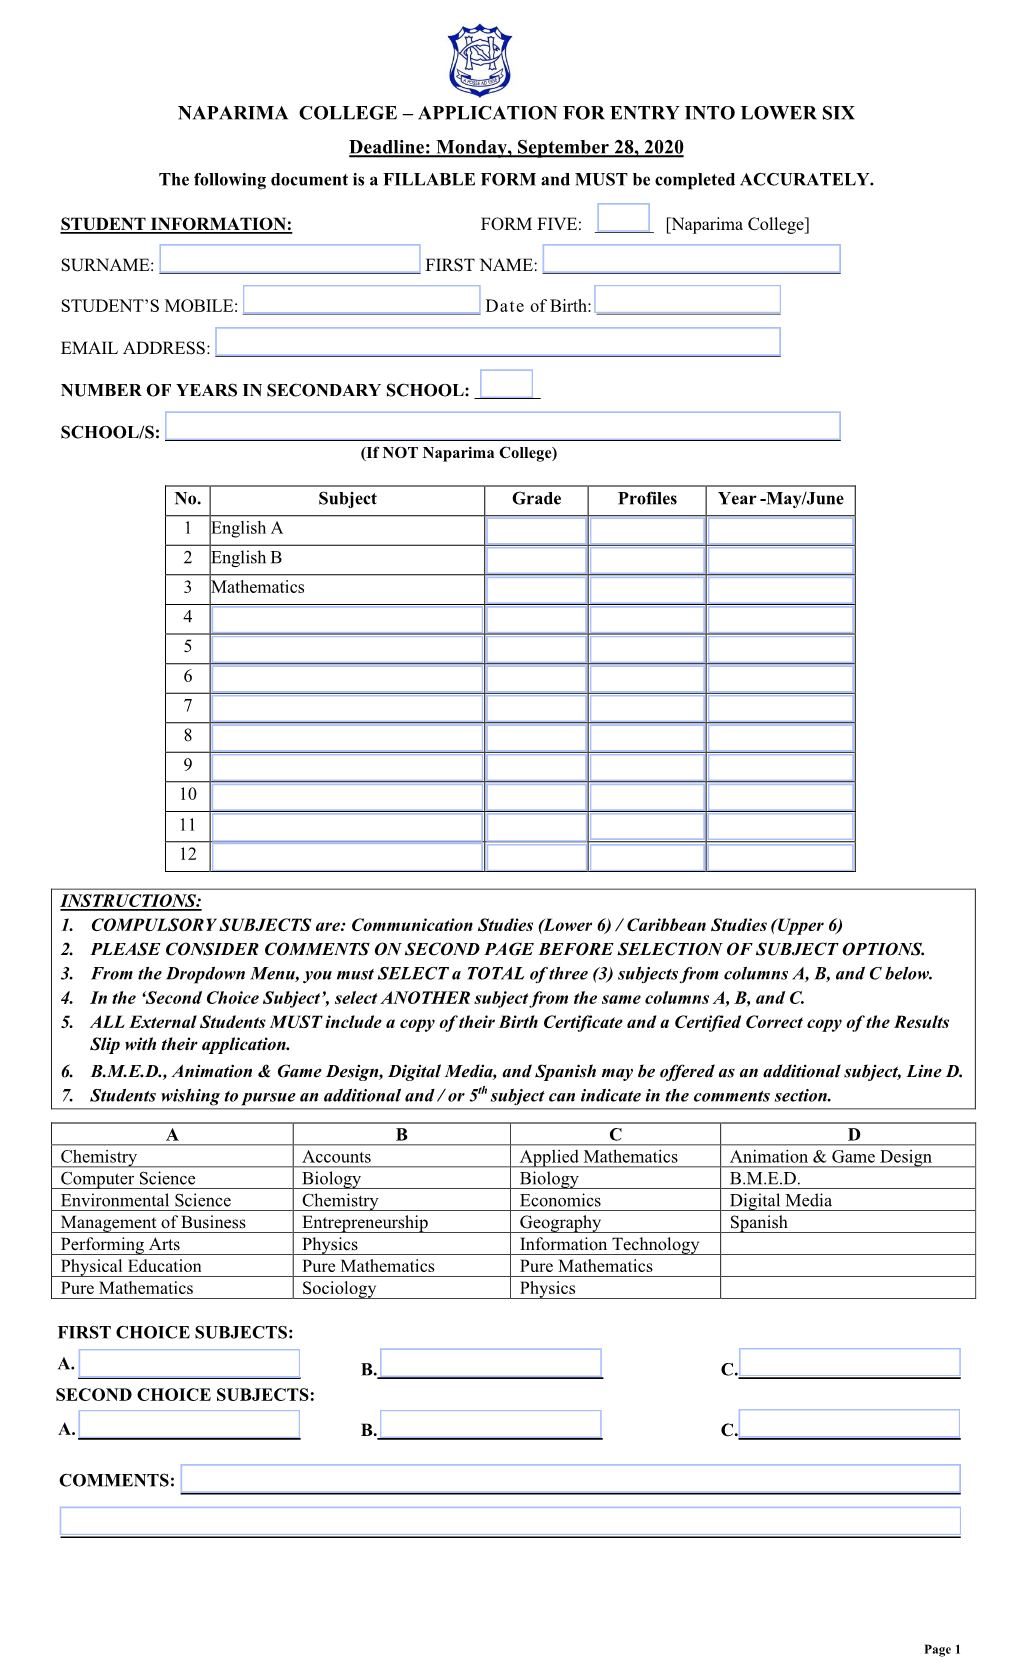 APPLICATION for ENTRY INTO LOWER SIX Deadline: Monday, September 28, 2020 the Following Document Is a FILLABLE FORM and MUST Be Completed ACCURATELY